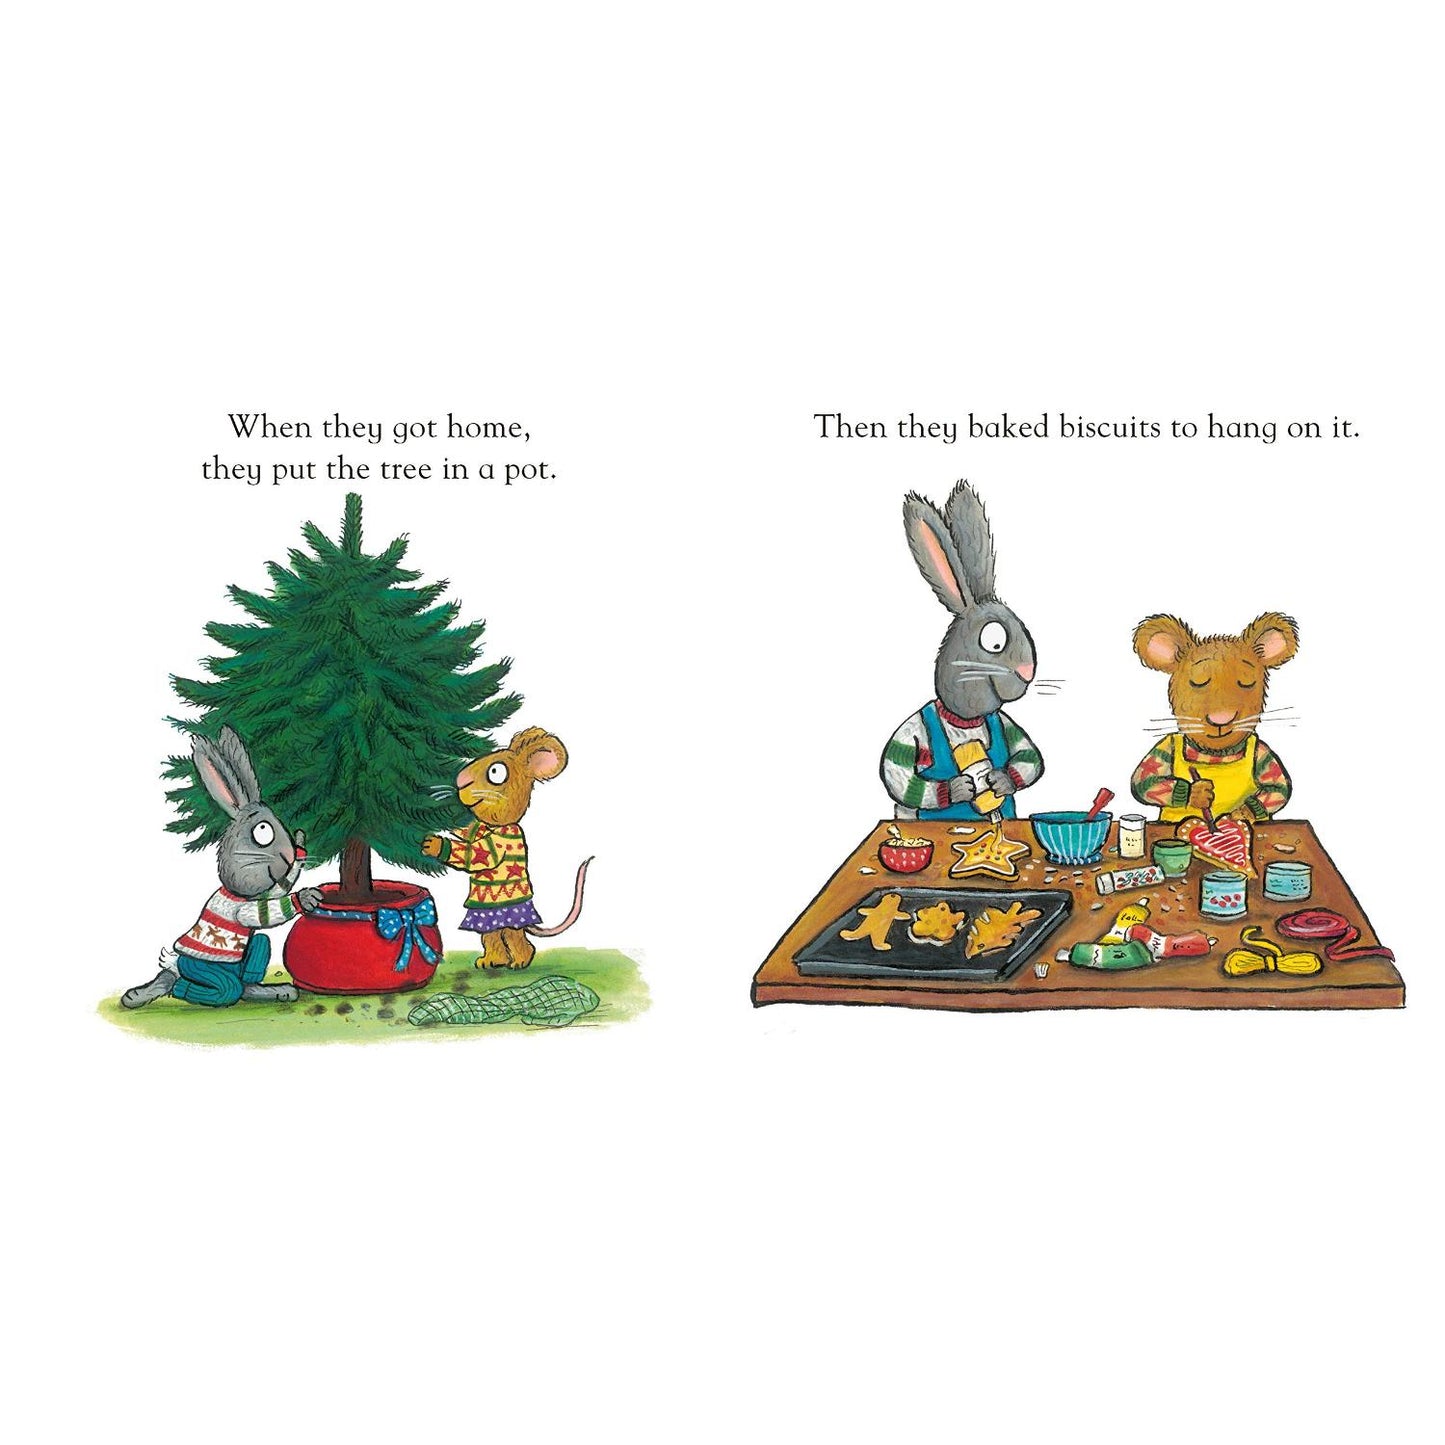 The Christmas Tree - Pip & Posy | Board Book | Toddler’s Book on Friendship